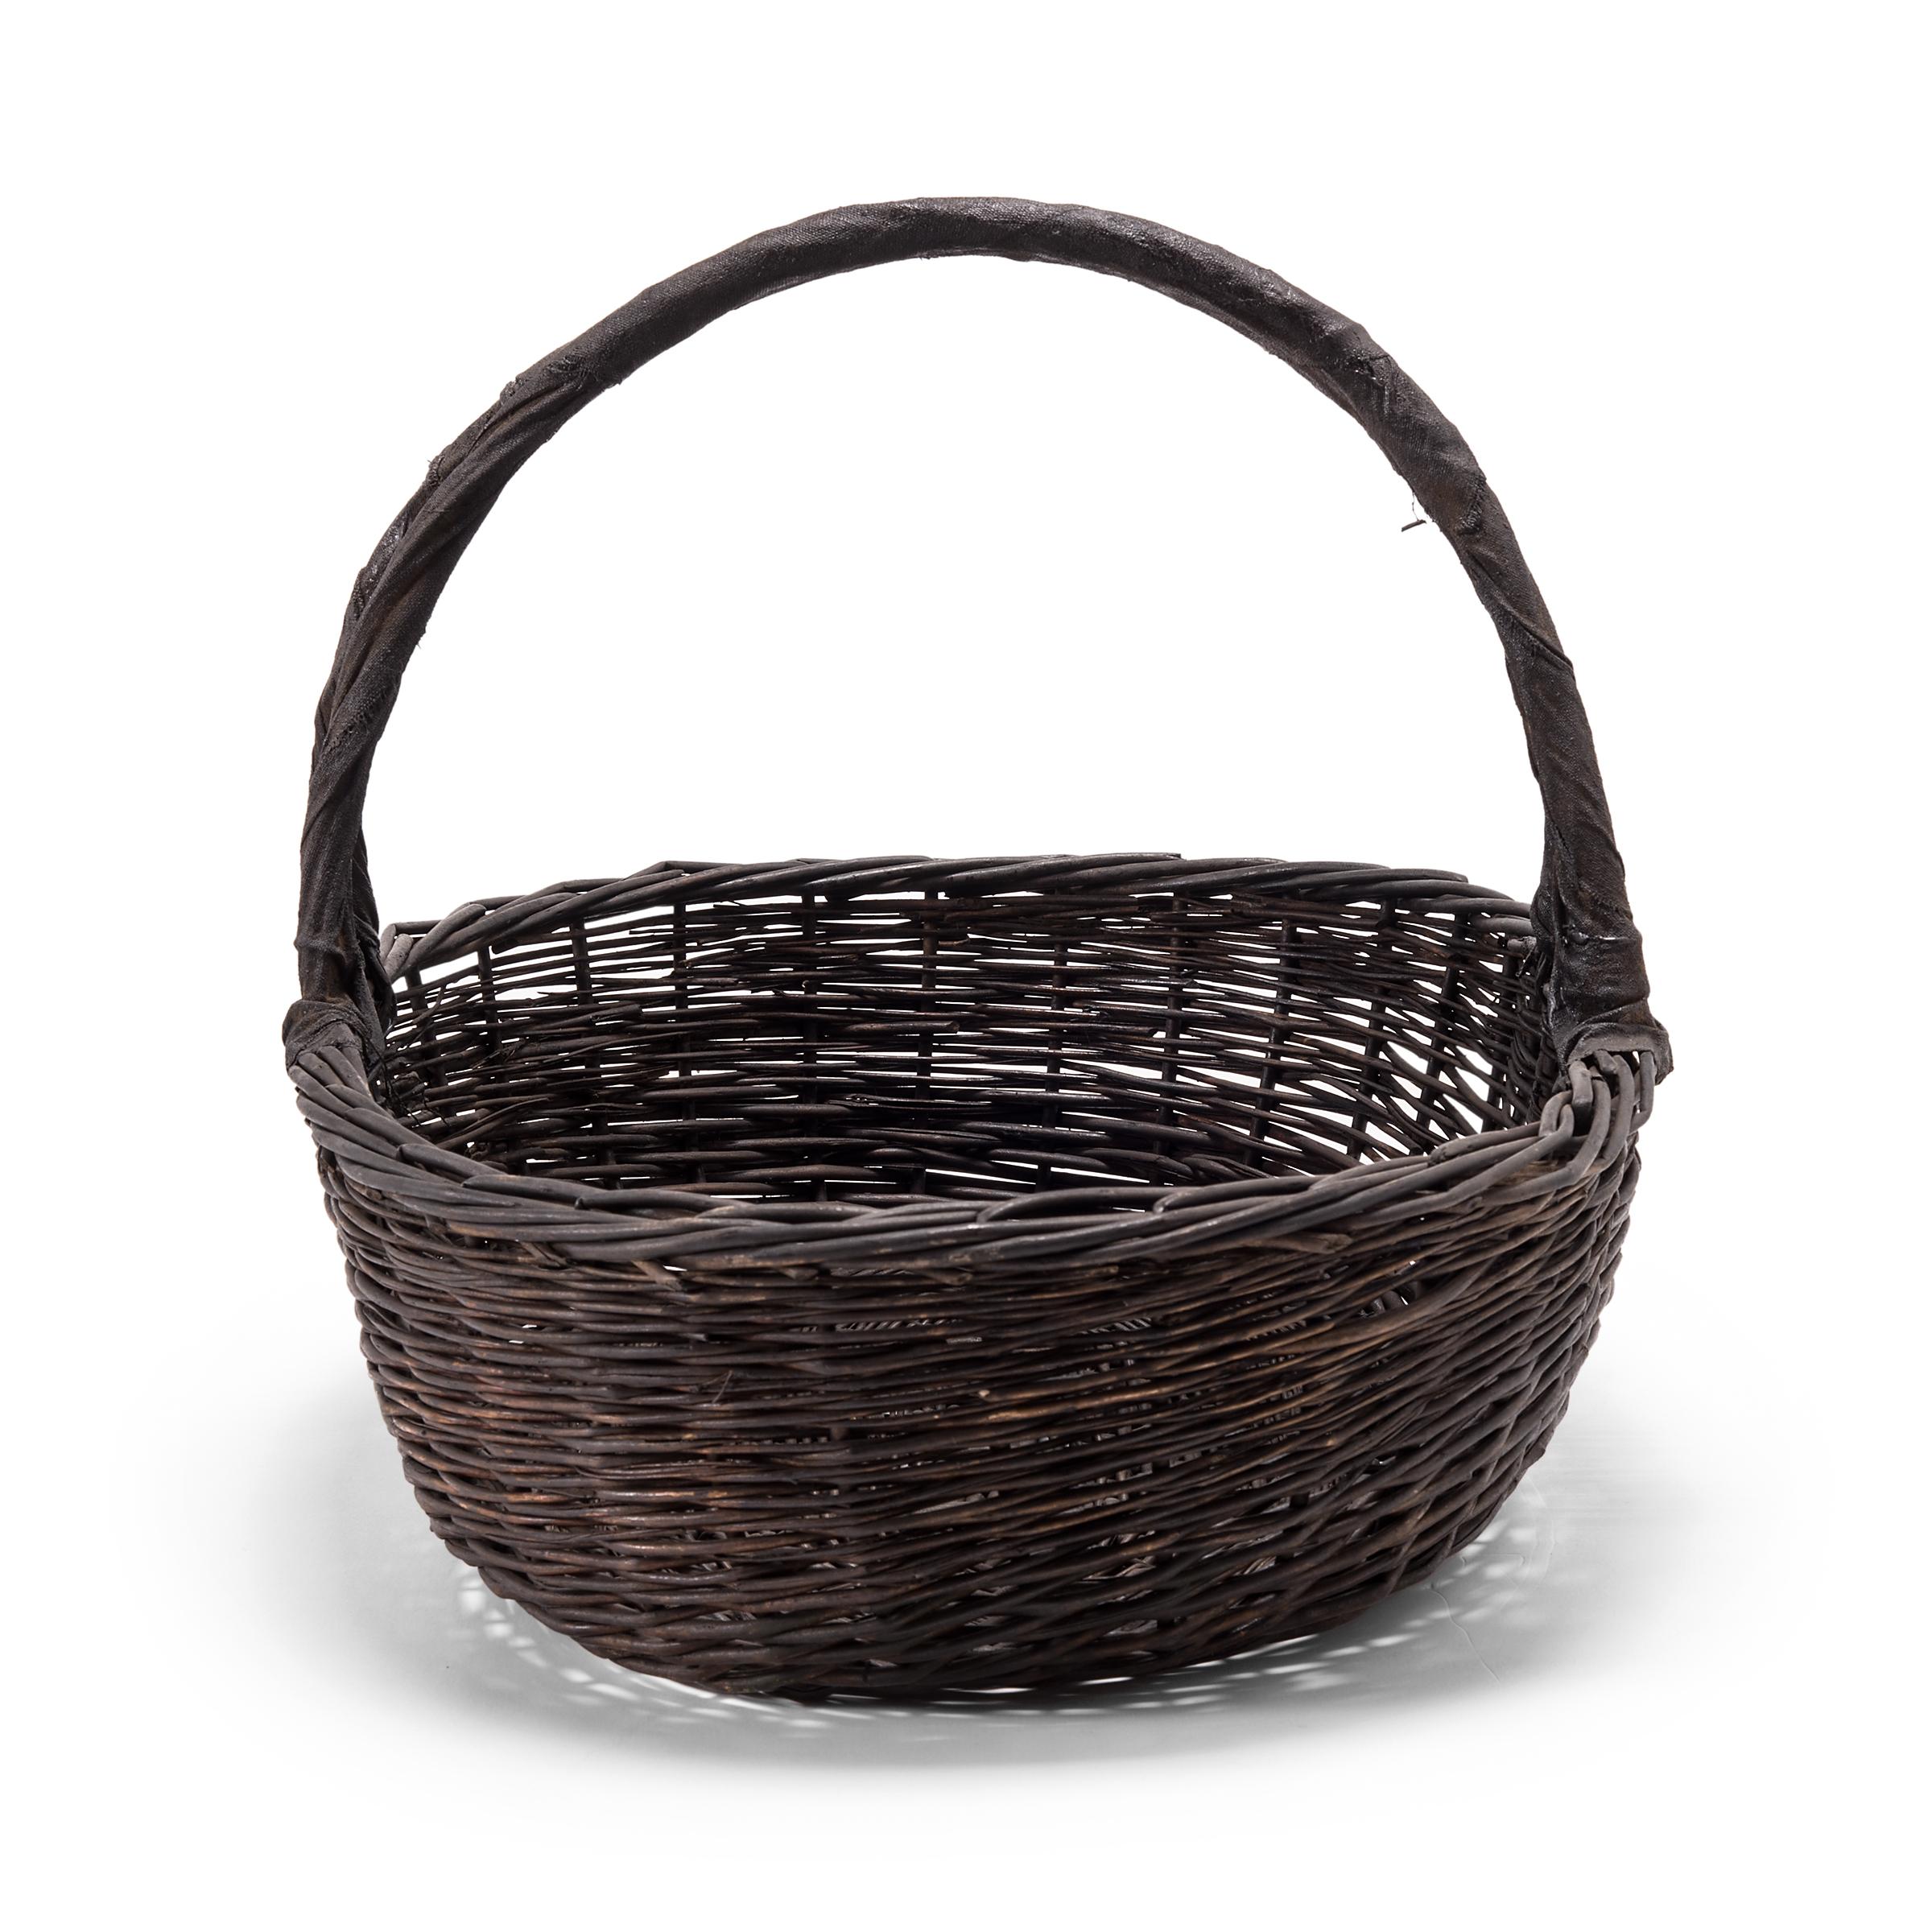 It's easy to imagine the original owner of this basket walking to market on a summer day with the arched handle slung over their arm. Used for carrying food or harvesting vegetables from the garden, this dark, woven basket is a beautiful example of